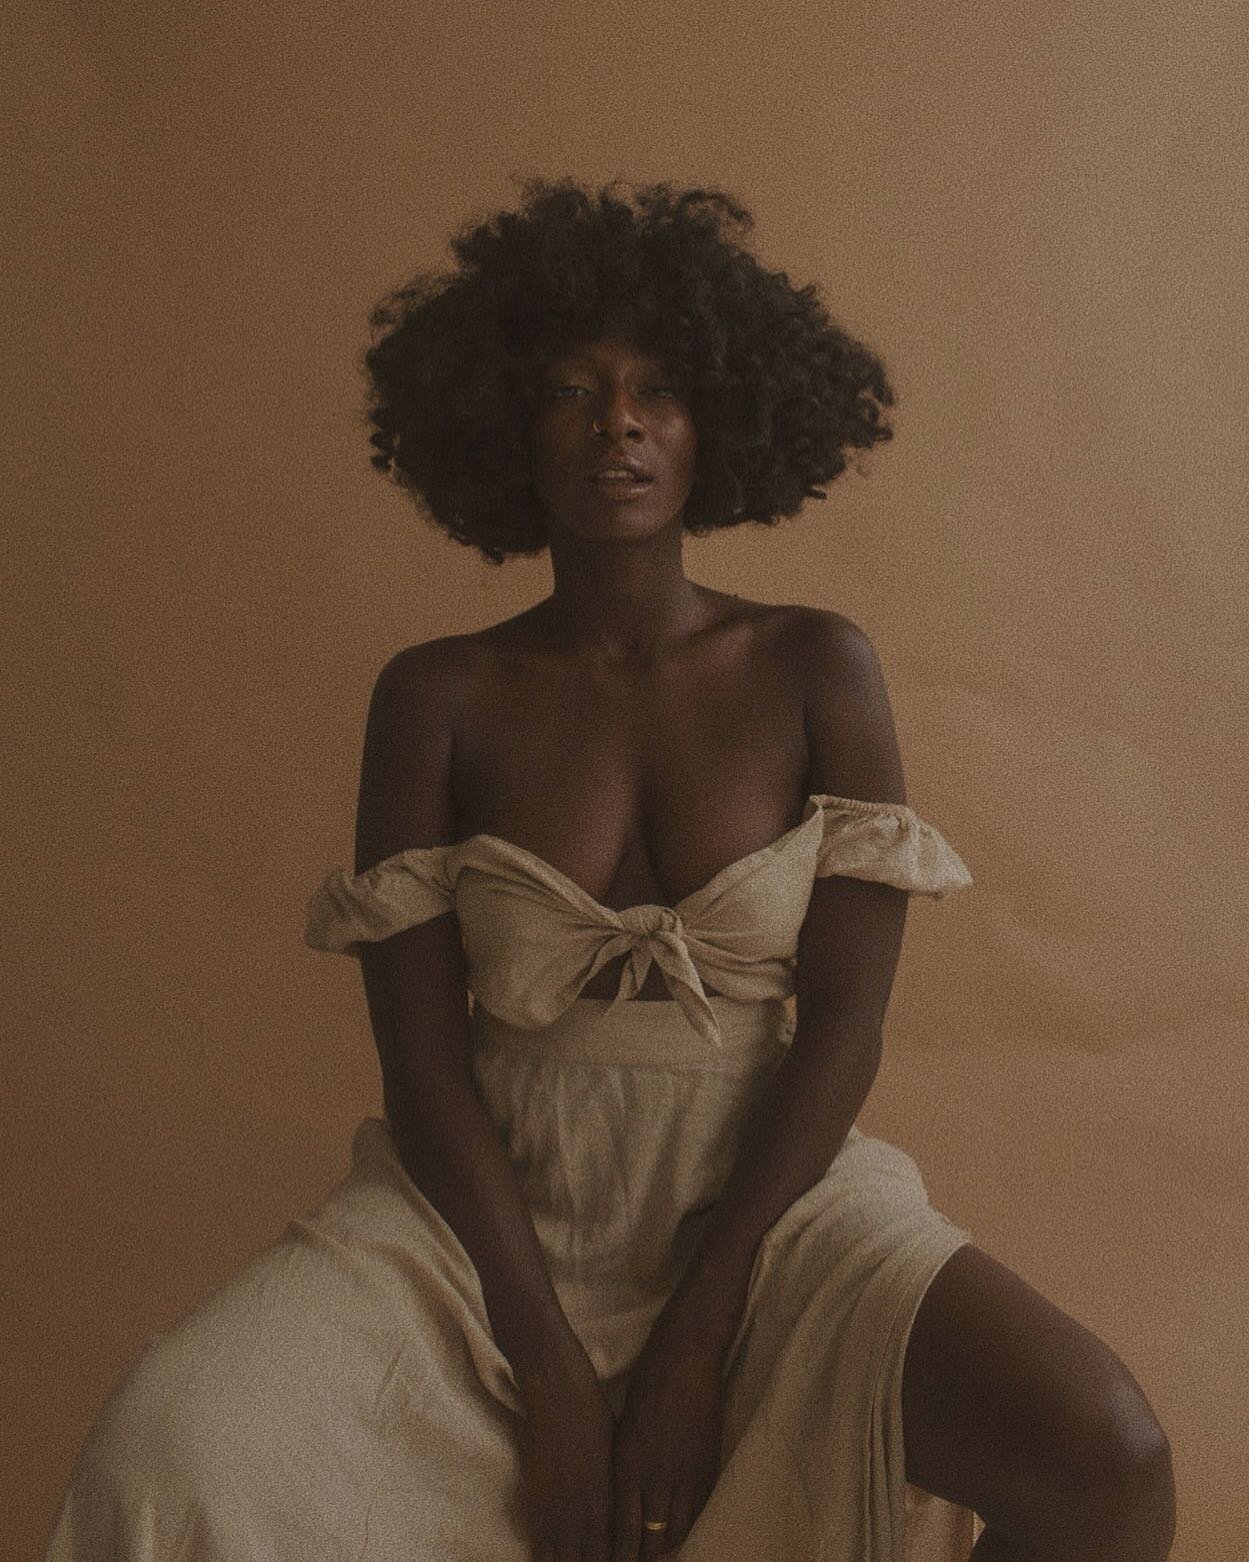 &quot;When she is told her skin is too dark; I do not hesitate to offer that the sun loved her so much, it kissed her more&nbsp;than the rest of us.&quot;&nbsp;
 ⠀⠀⠀⠀⠀⠀⠀⠀⠀⠀⠀⠀
Rooted in a skewed standard of beauty and femininity&nbsp;constructed aroun